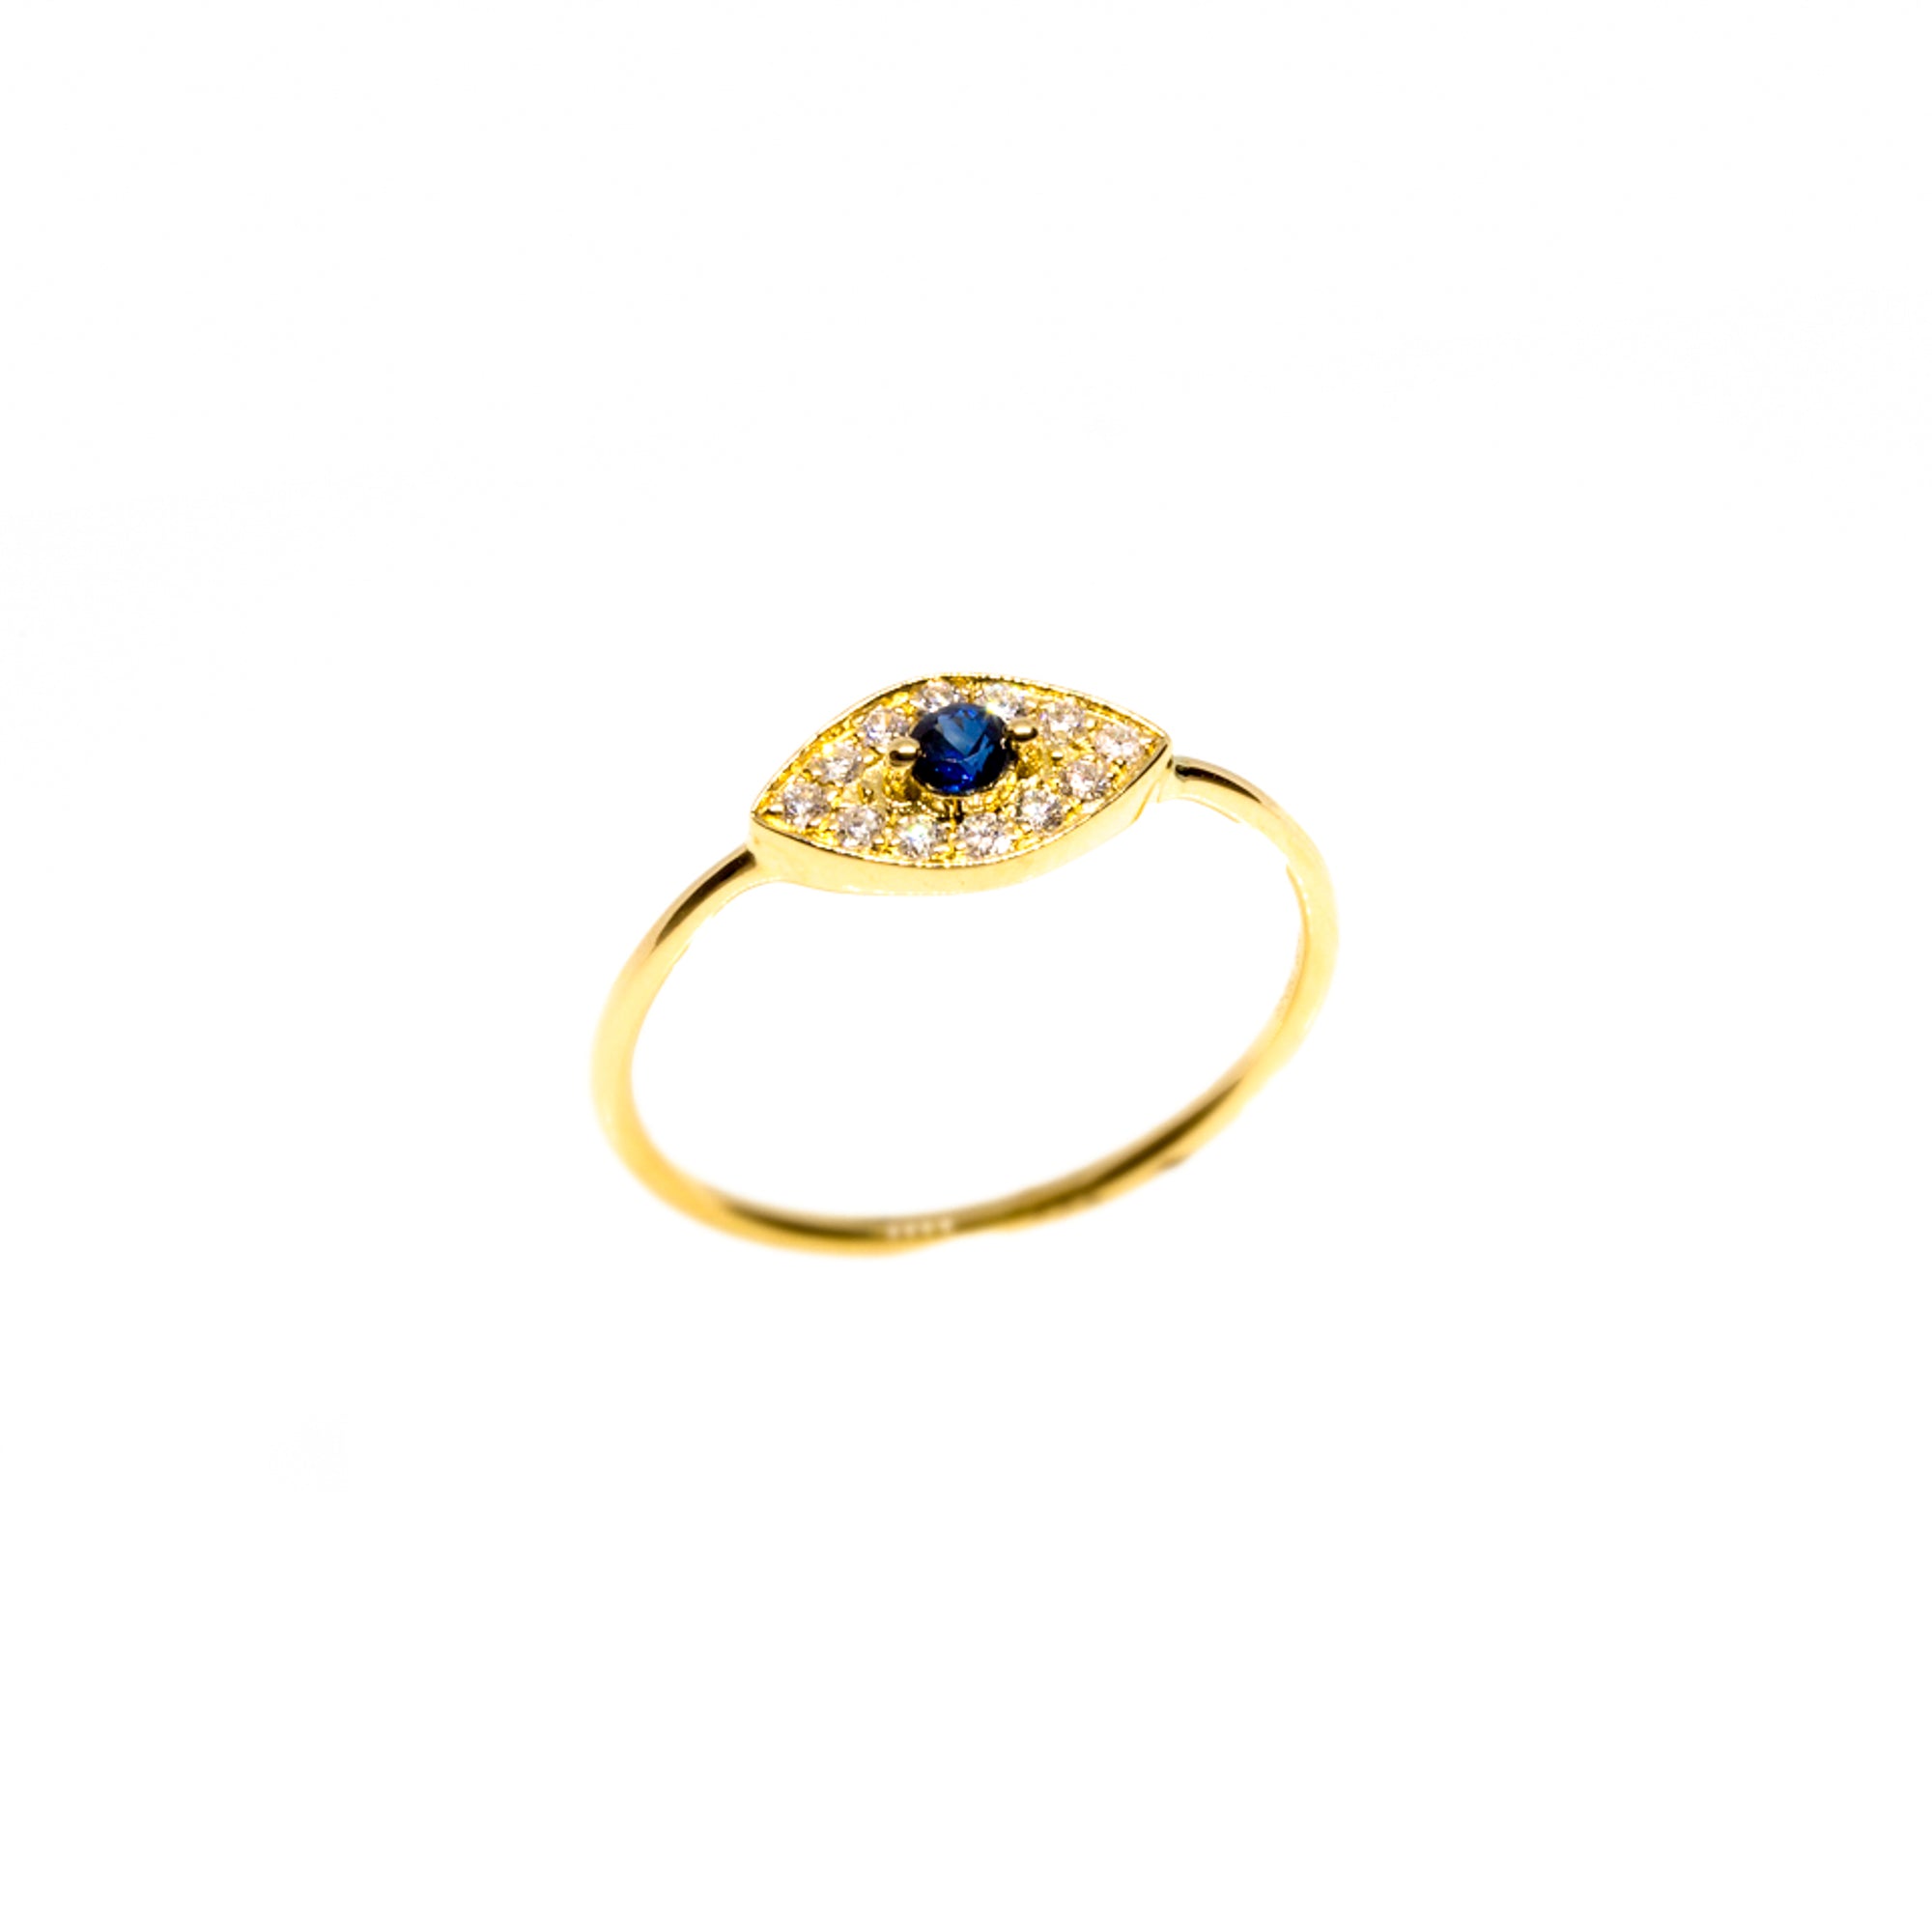 THE OPEN CUT PAVE' EVIL EYE RING – The M Jewelers